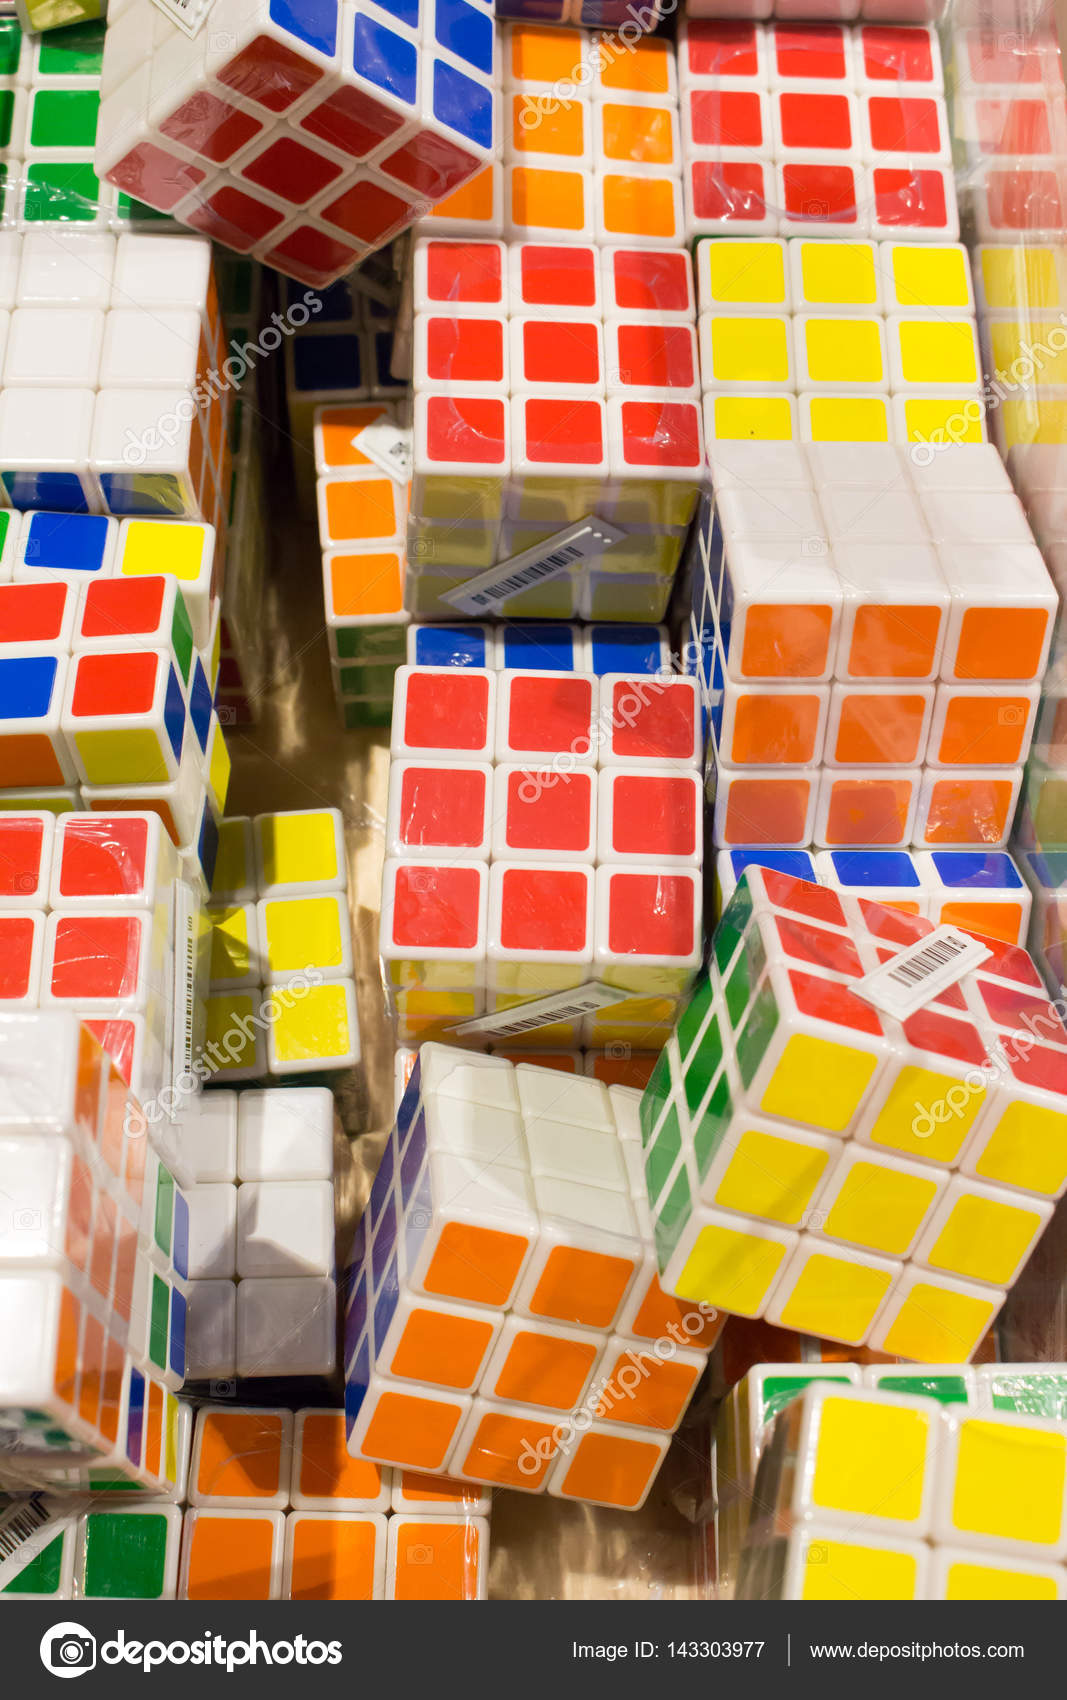 Barcelona Mount Bank ballet Rubik's Cube sold in the shop Stock Photo by ©wasnoch 143303977